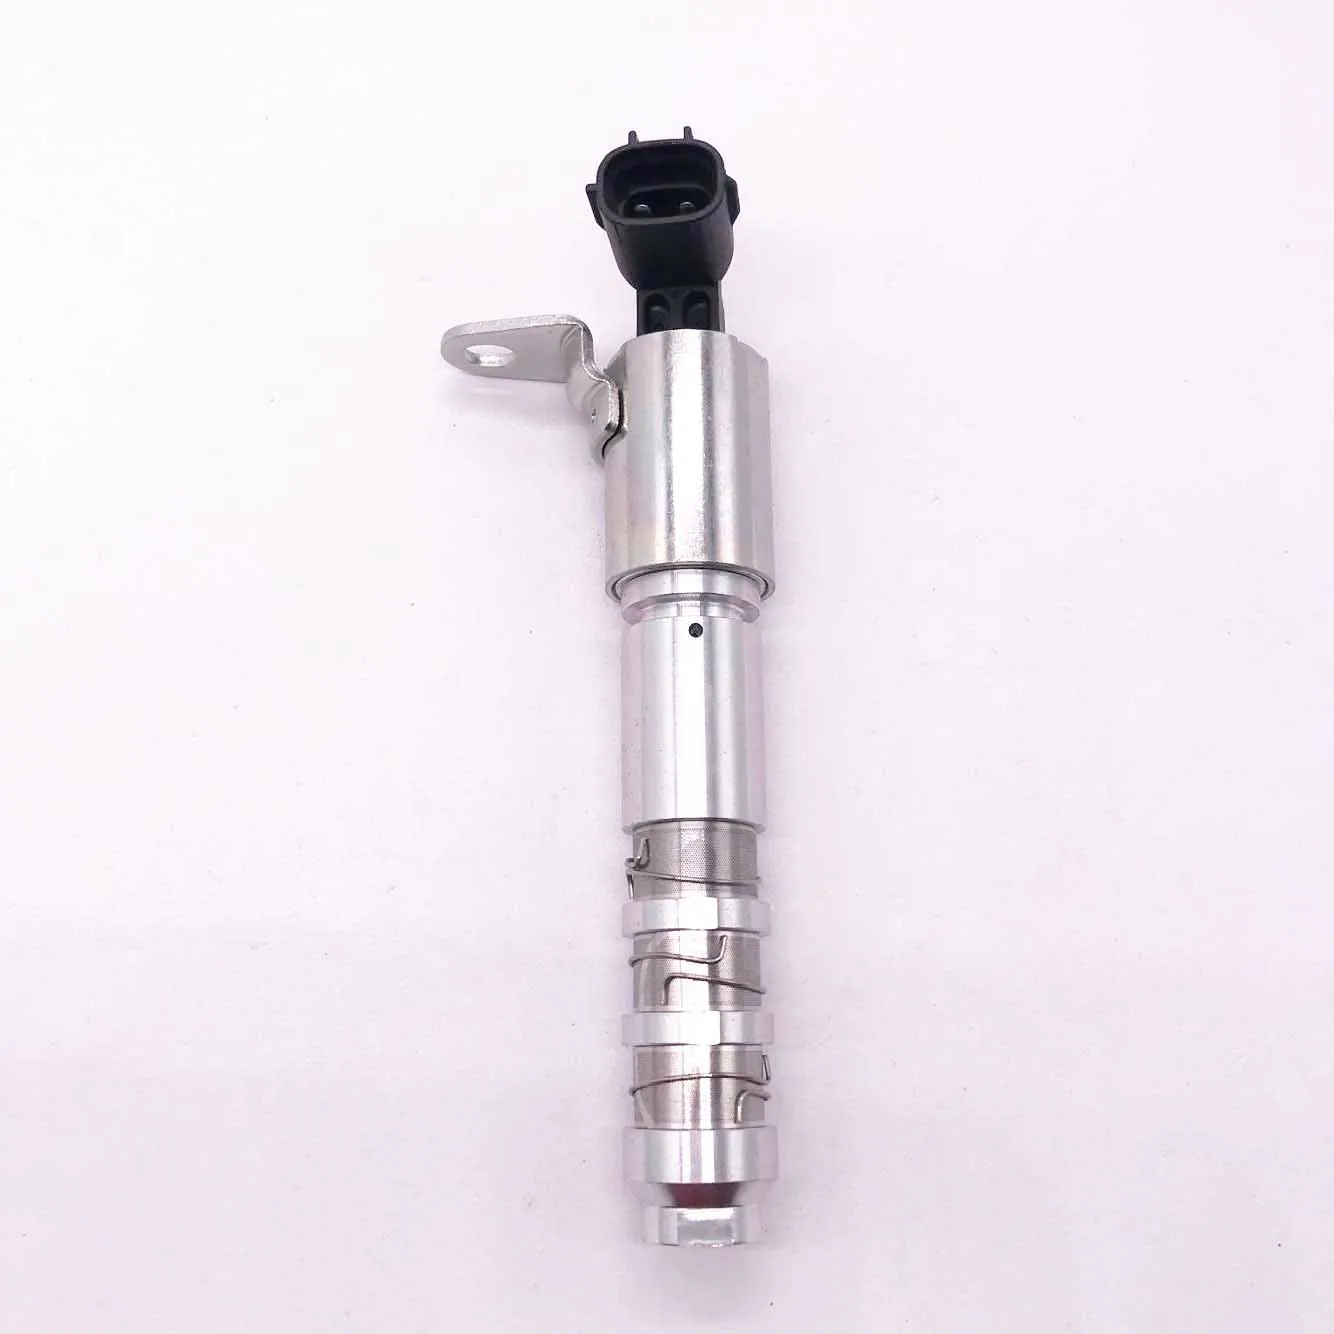 

8481809005 00080044973546 TS1013 73-12013 2T1013 Engine Variable Timing Solenoid 12636175 12626012 12586722 12615613 12588943